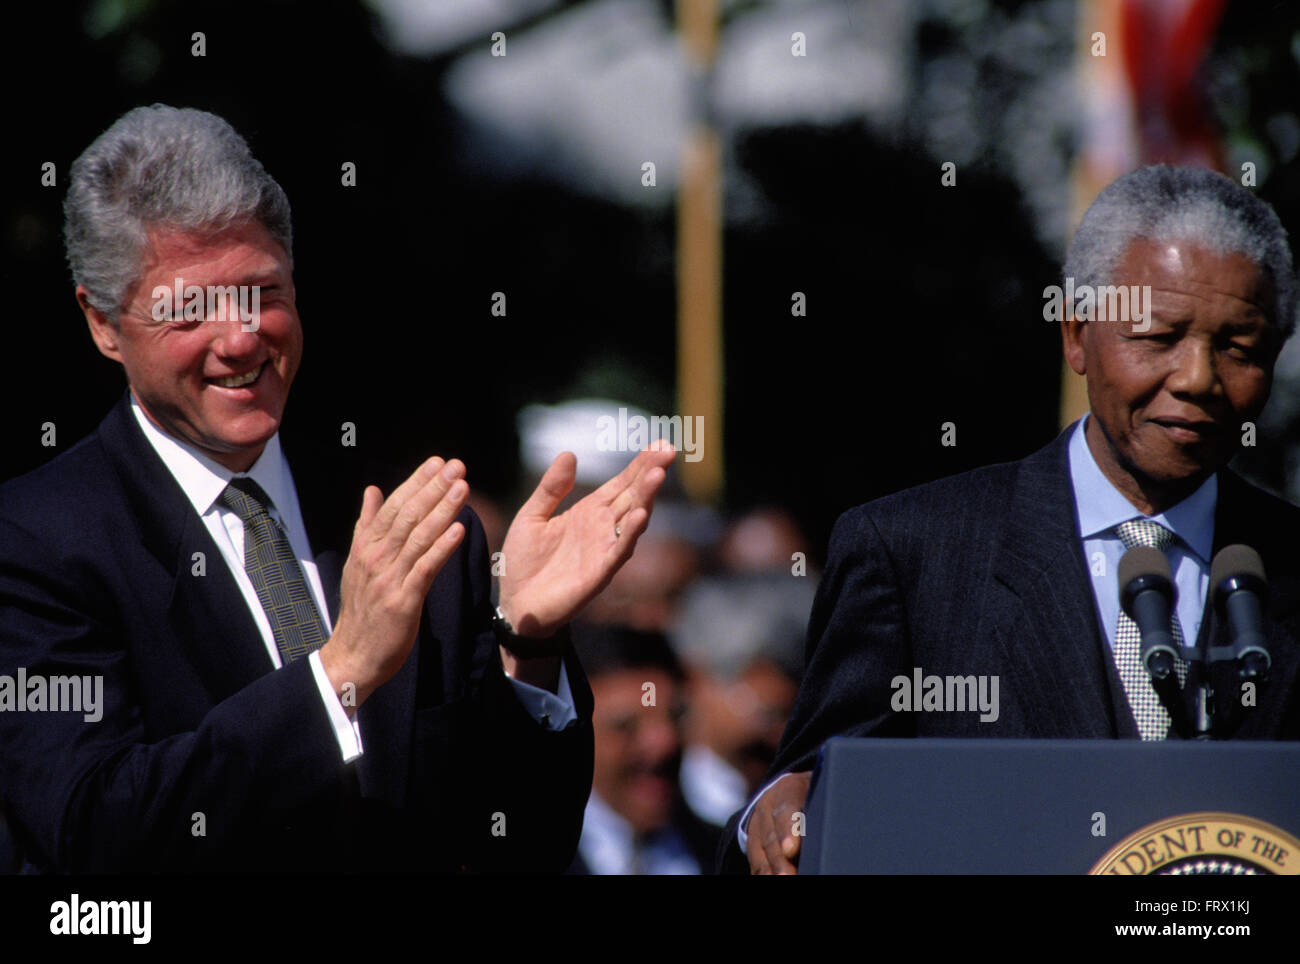 Washington, DC., USA, 5th October, 1994 President William Jefferson Clinton hosts South African President Nelson Mandella at the White House. Mandella was a South African anti-apartheid revolutionary, politician and philanthropist who served as President of South Africa from 1994 to 1999. He was South Africa's first black chief executive, and the first elected in a fully representative democratic election. His government focused on dismantling the legacy of apartheid through tackling institutionalized racism, poverty and inequality, and fostering racial reconciliation. Credit: Mark Reinstein Stock Photo